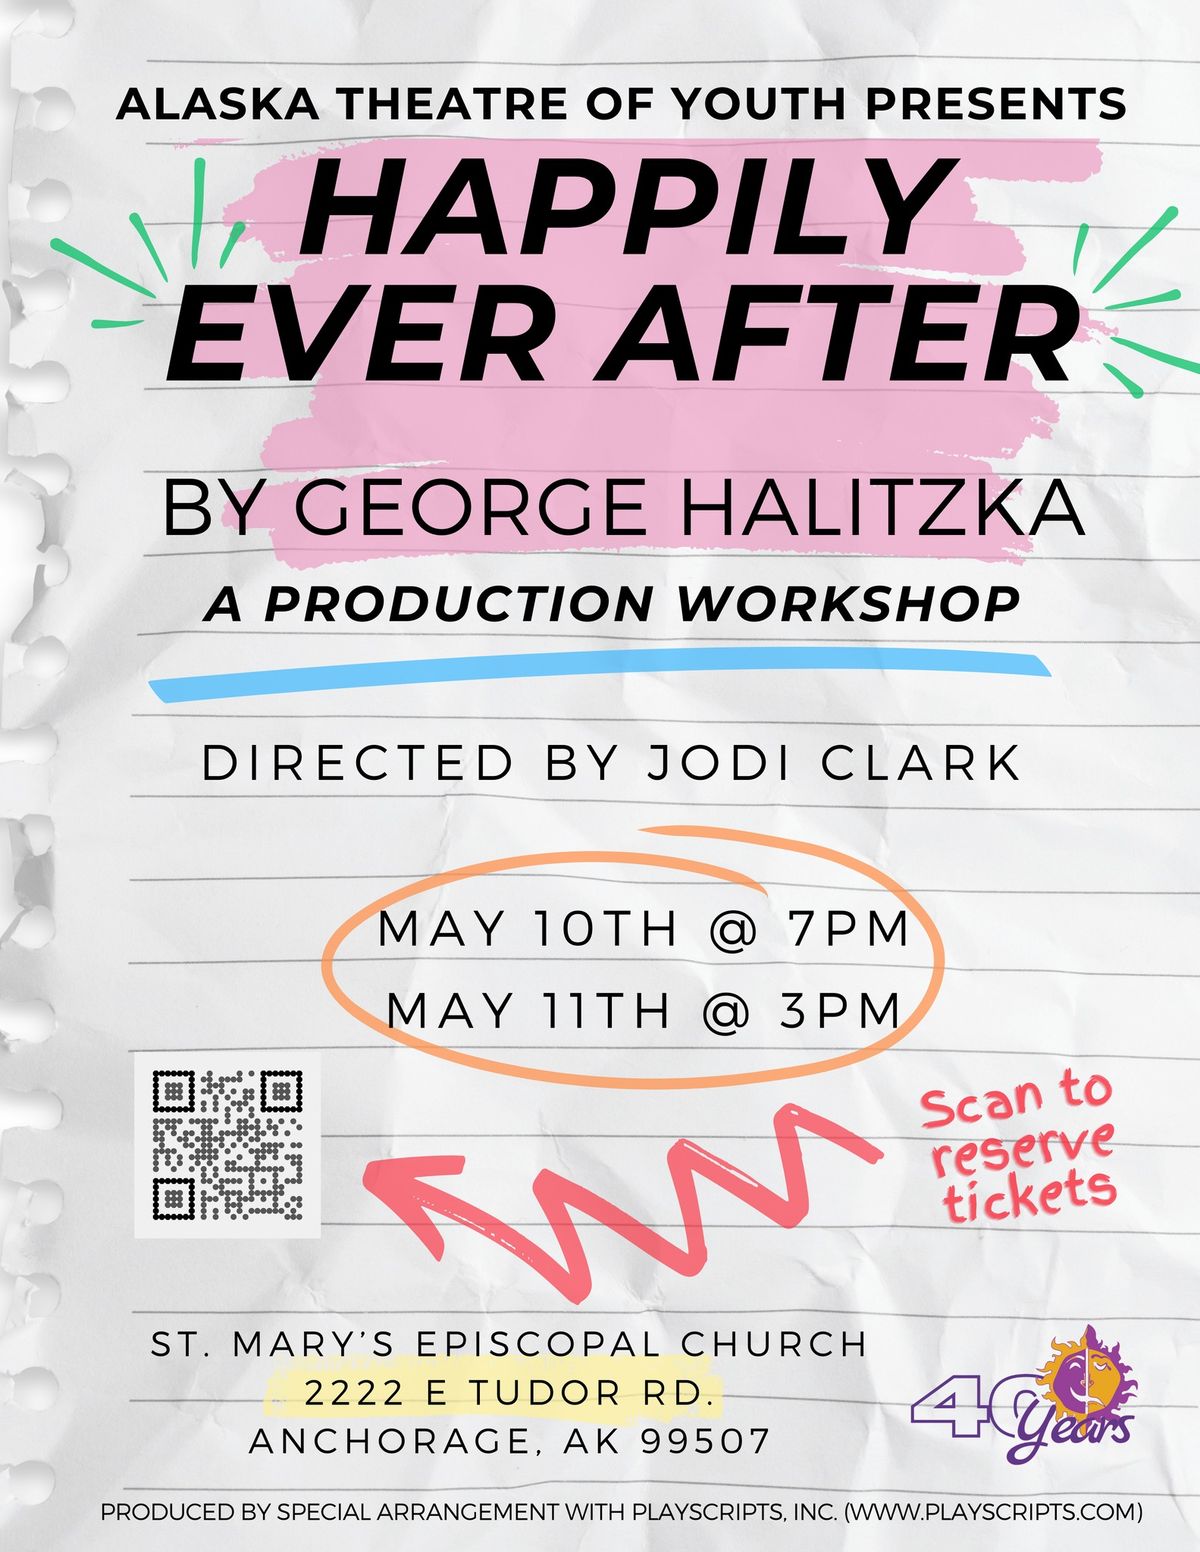 "Happily Ever After" Theatre Play